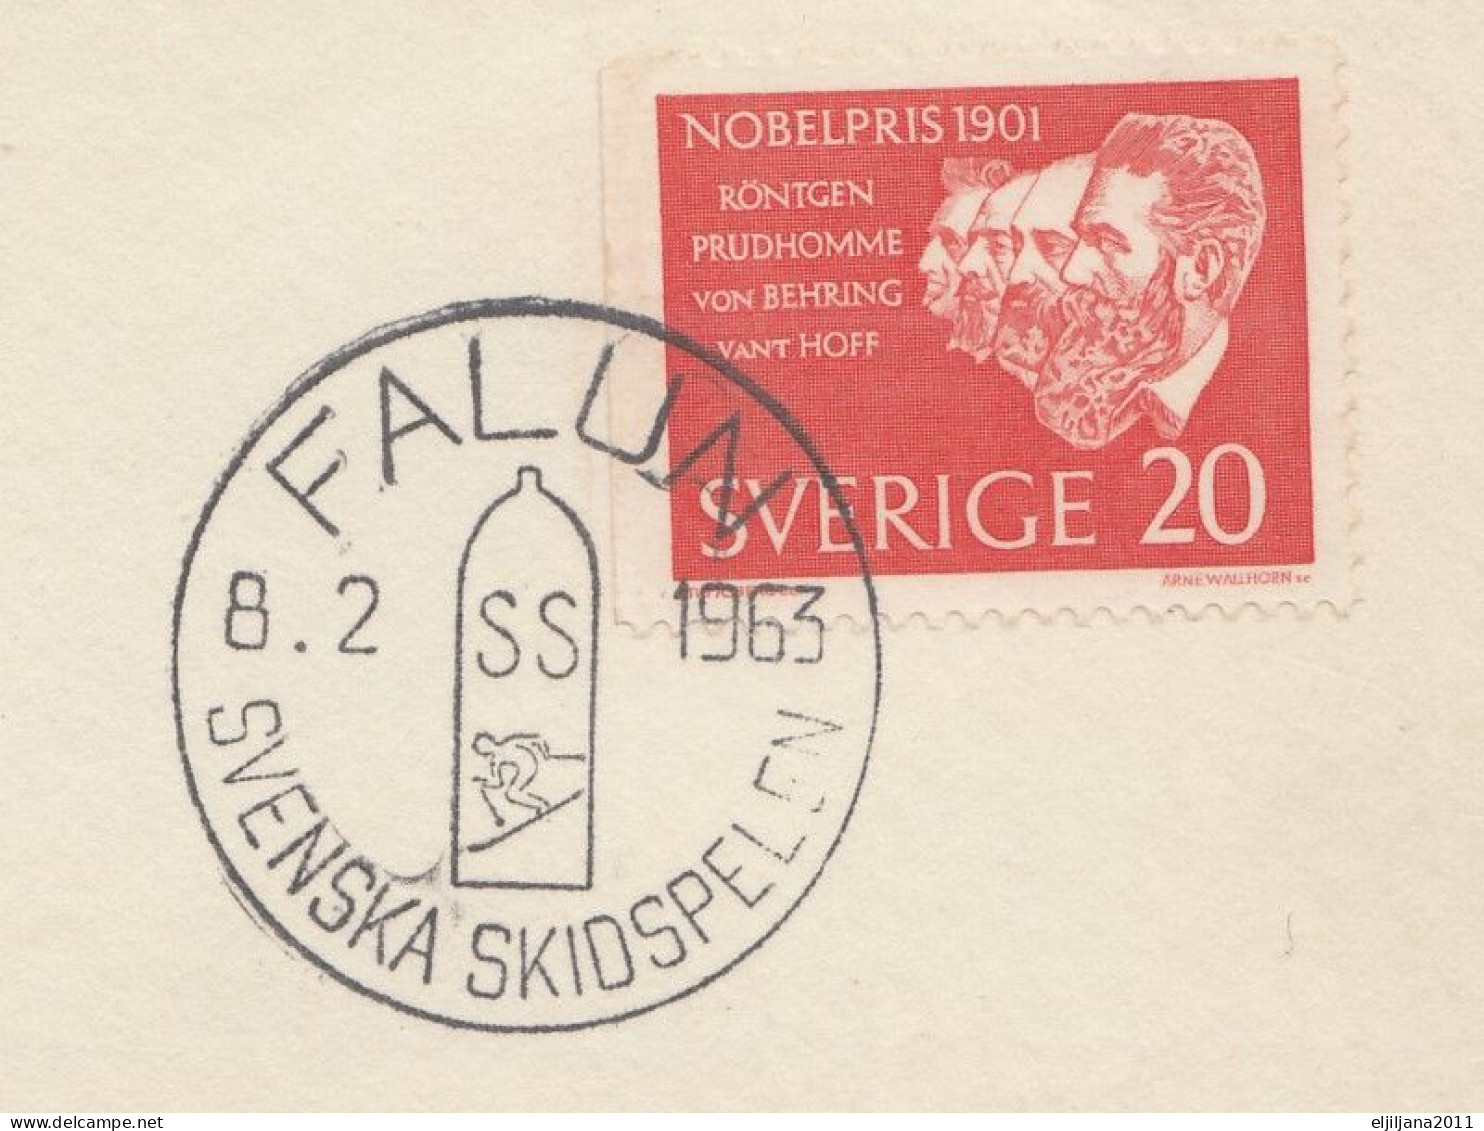 Action !! SALE !! 50 % OFF !! ⁕ Sweden / Sverige 1963  Skiing FALUN, SUNDSVALL, LULEA  3v Covers - Lettres & Documents